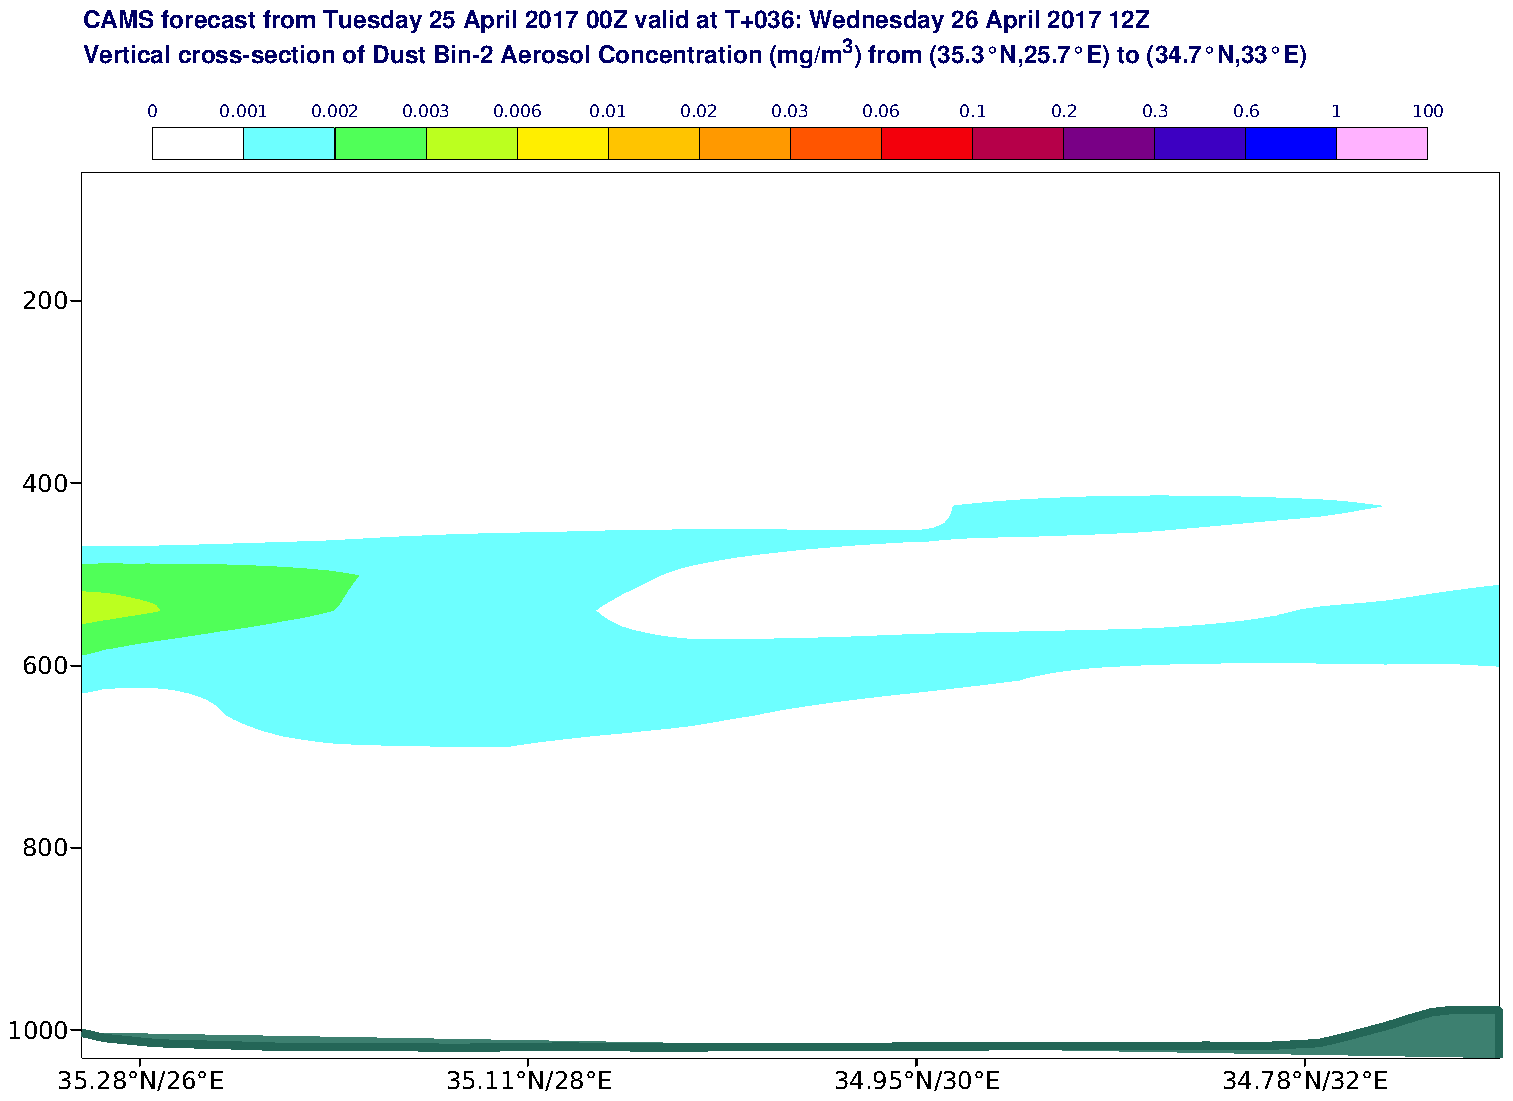 Vertical cross-section of Dust Bin-2 Aerosol Concentration (mg/m3) valid at T36 - 2017-04-26 12:00